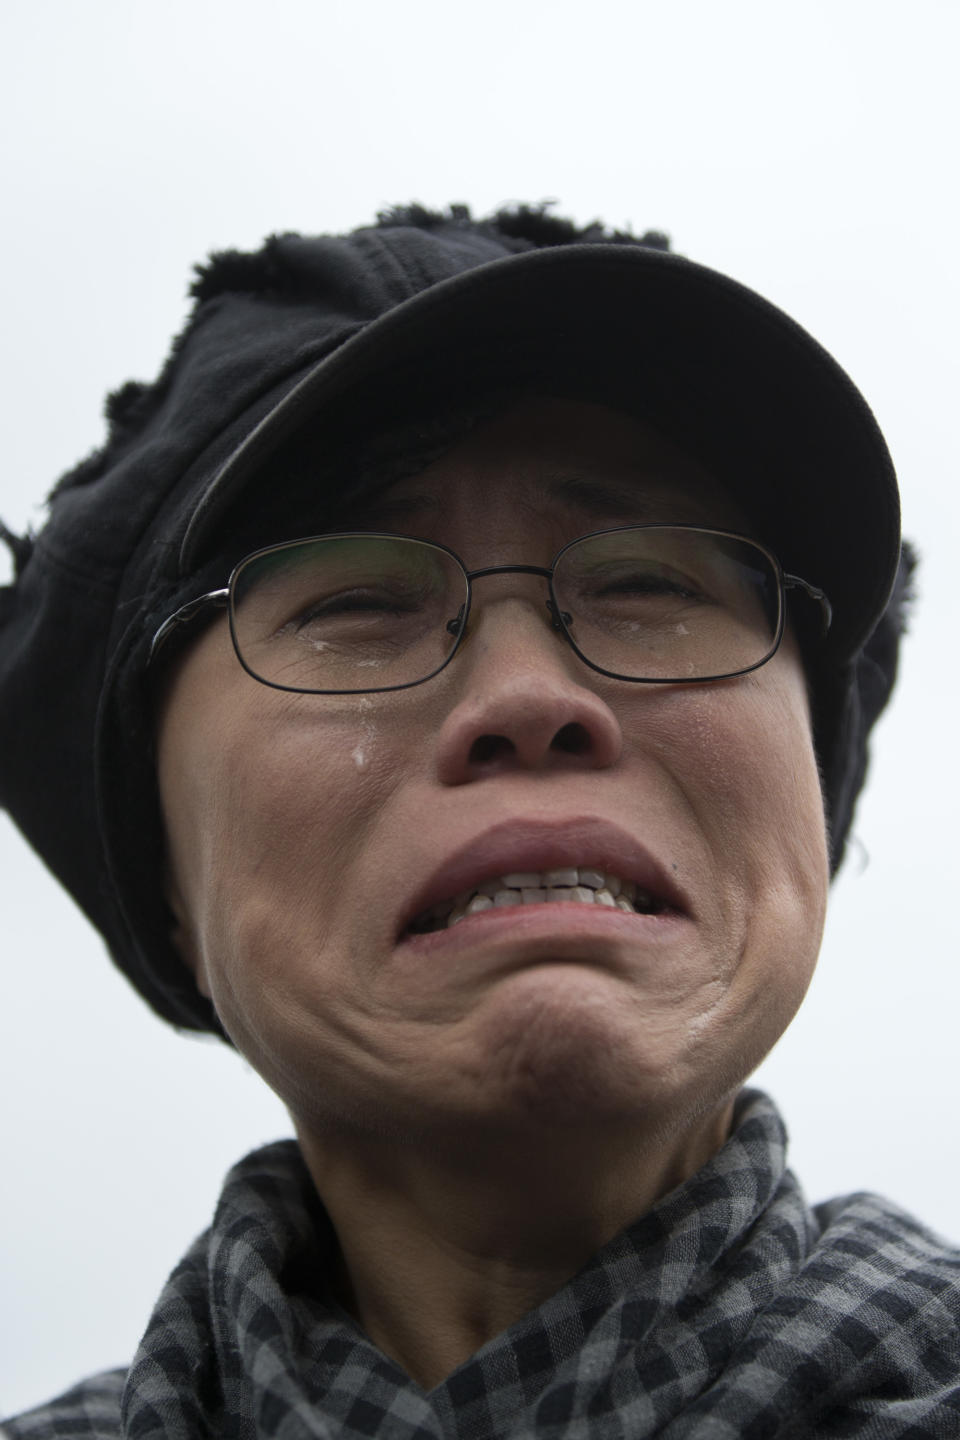 FILE - In this June 9, 2013 file photo, Liu Xia, the wife of imprisoned Nobel Peace Prize winner Liu Xiaobo, cries outside Huairou Detention Center where her brother Liu Hui has been jailed in Huairou district, on the outskirts of Beijing, China. The health of Liu Xia has deteriorated under lengthy house arrest and she urgently requires medical treatment, close friends said Friday, Feb. 14, 2014. (AP Photo/Alexander F. Yuan, File)